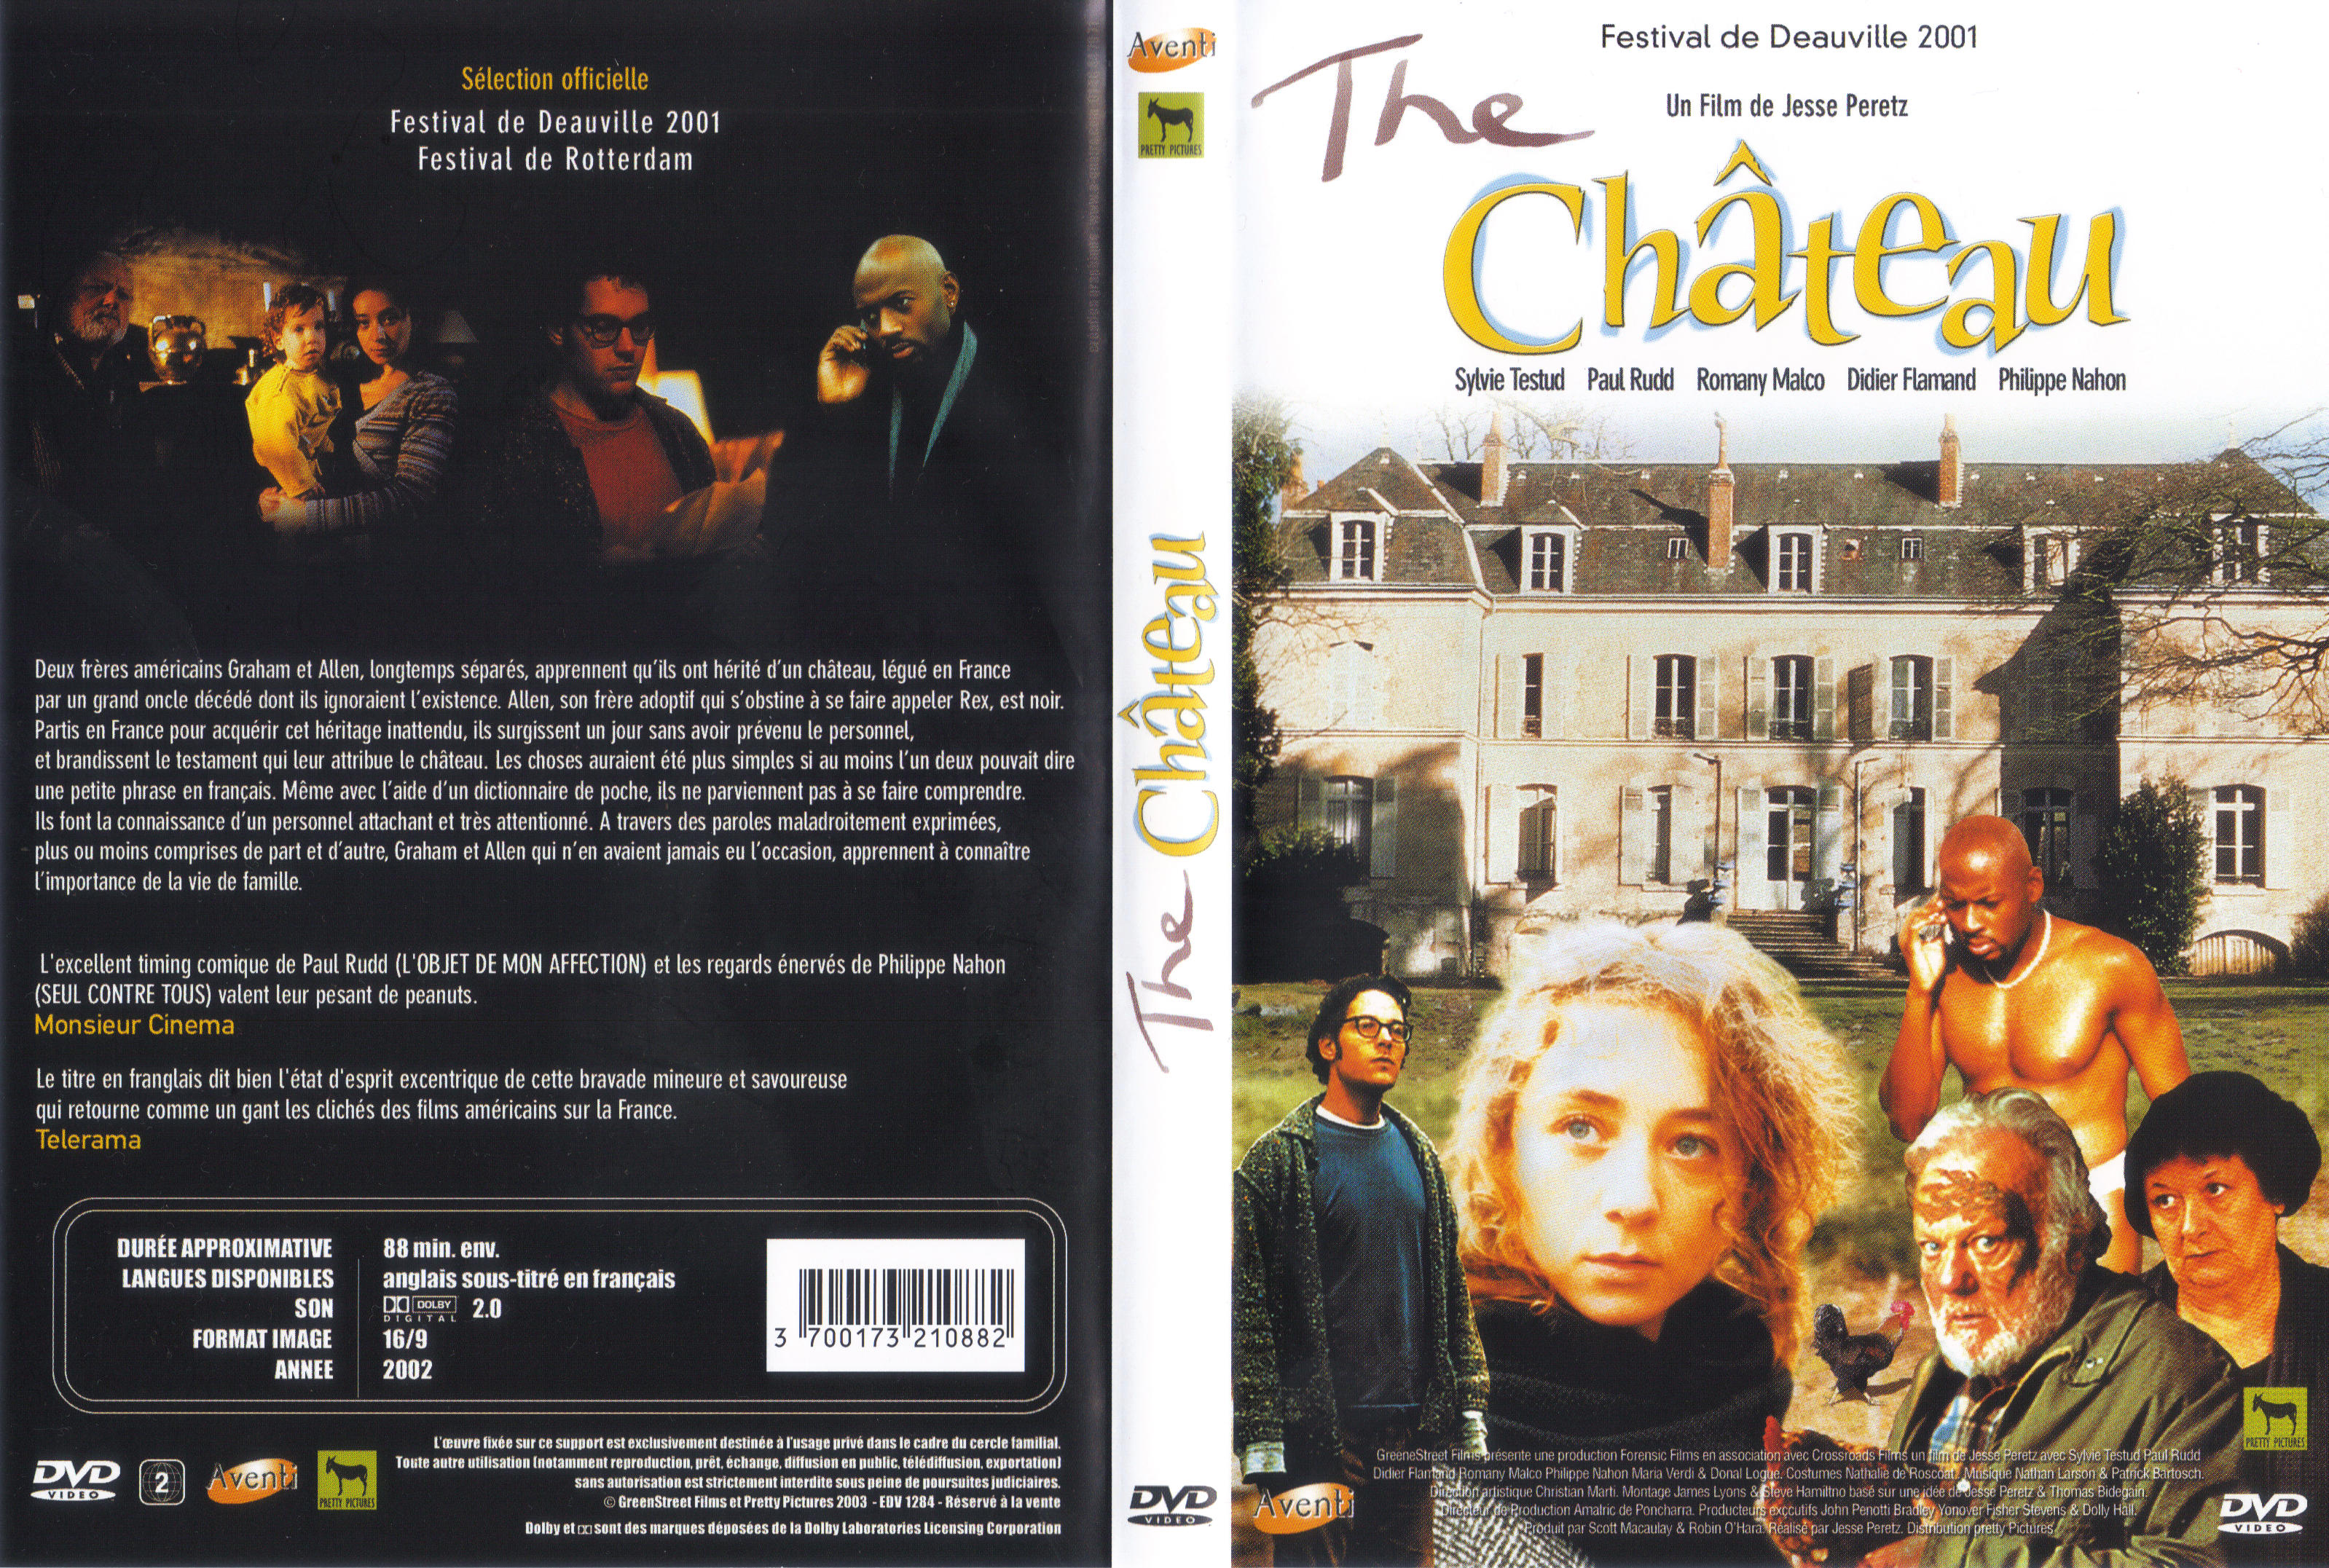 Jaquette DVD The chateau